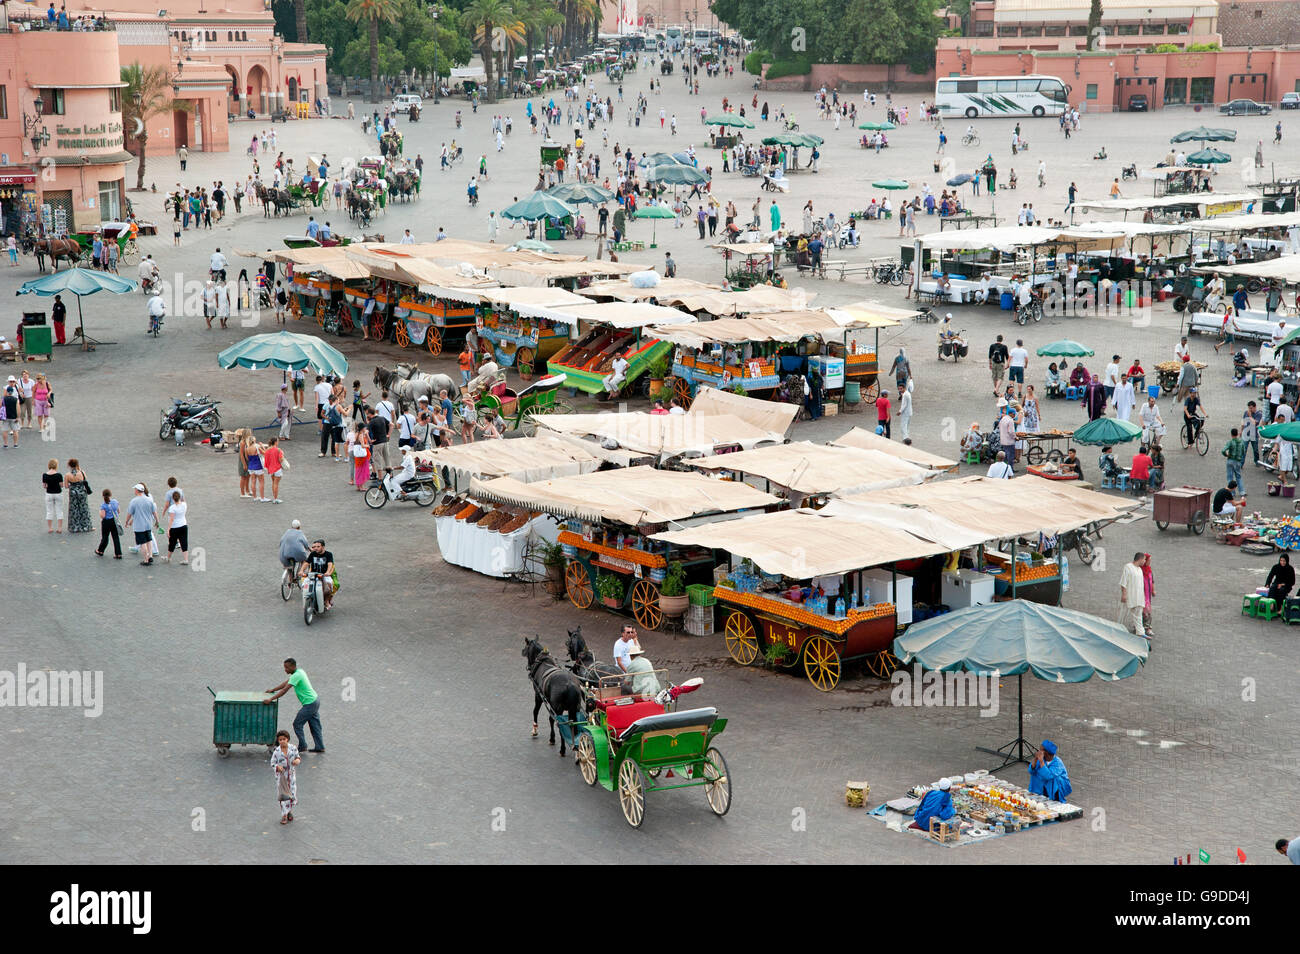 Hustle and bustle on the Jemaa el-Fnaa square, UNESCO World Heritage Site, in Marrakech, Morocco, North Africa, Africa Stock Photo